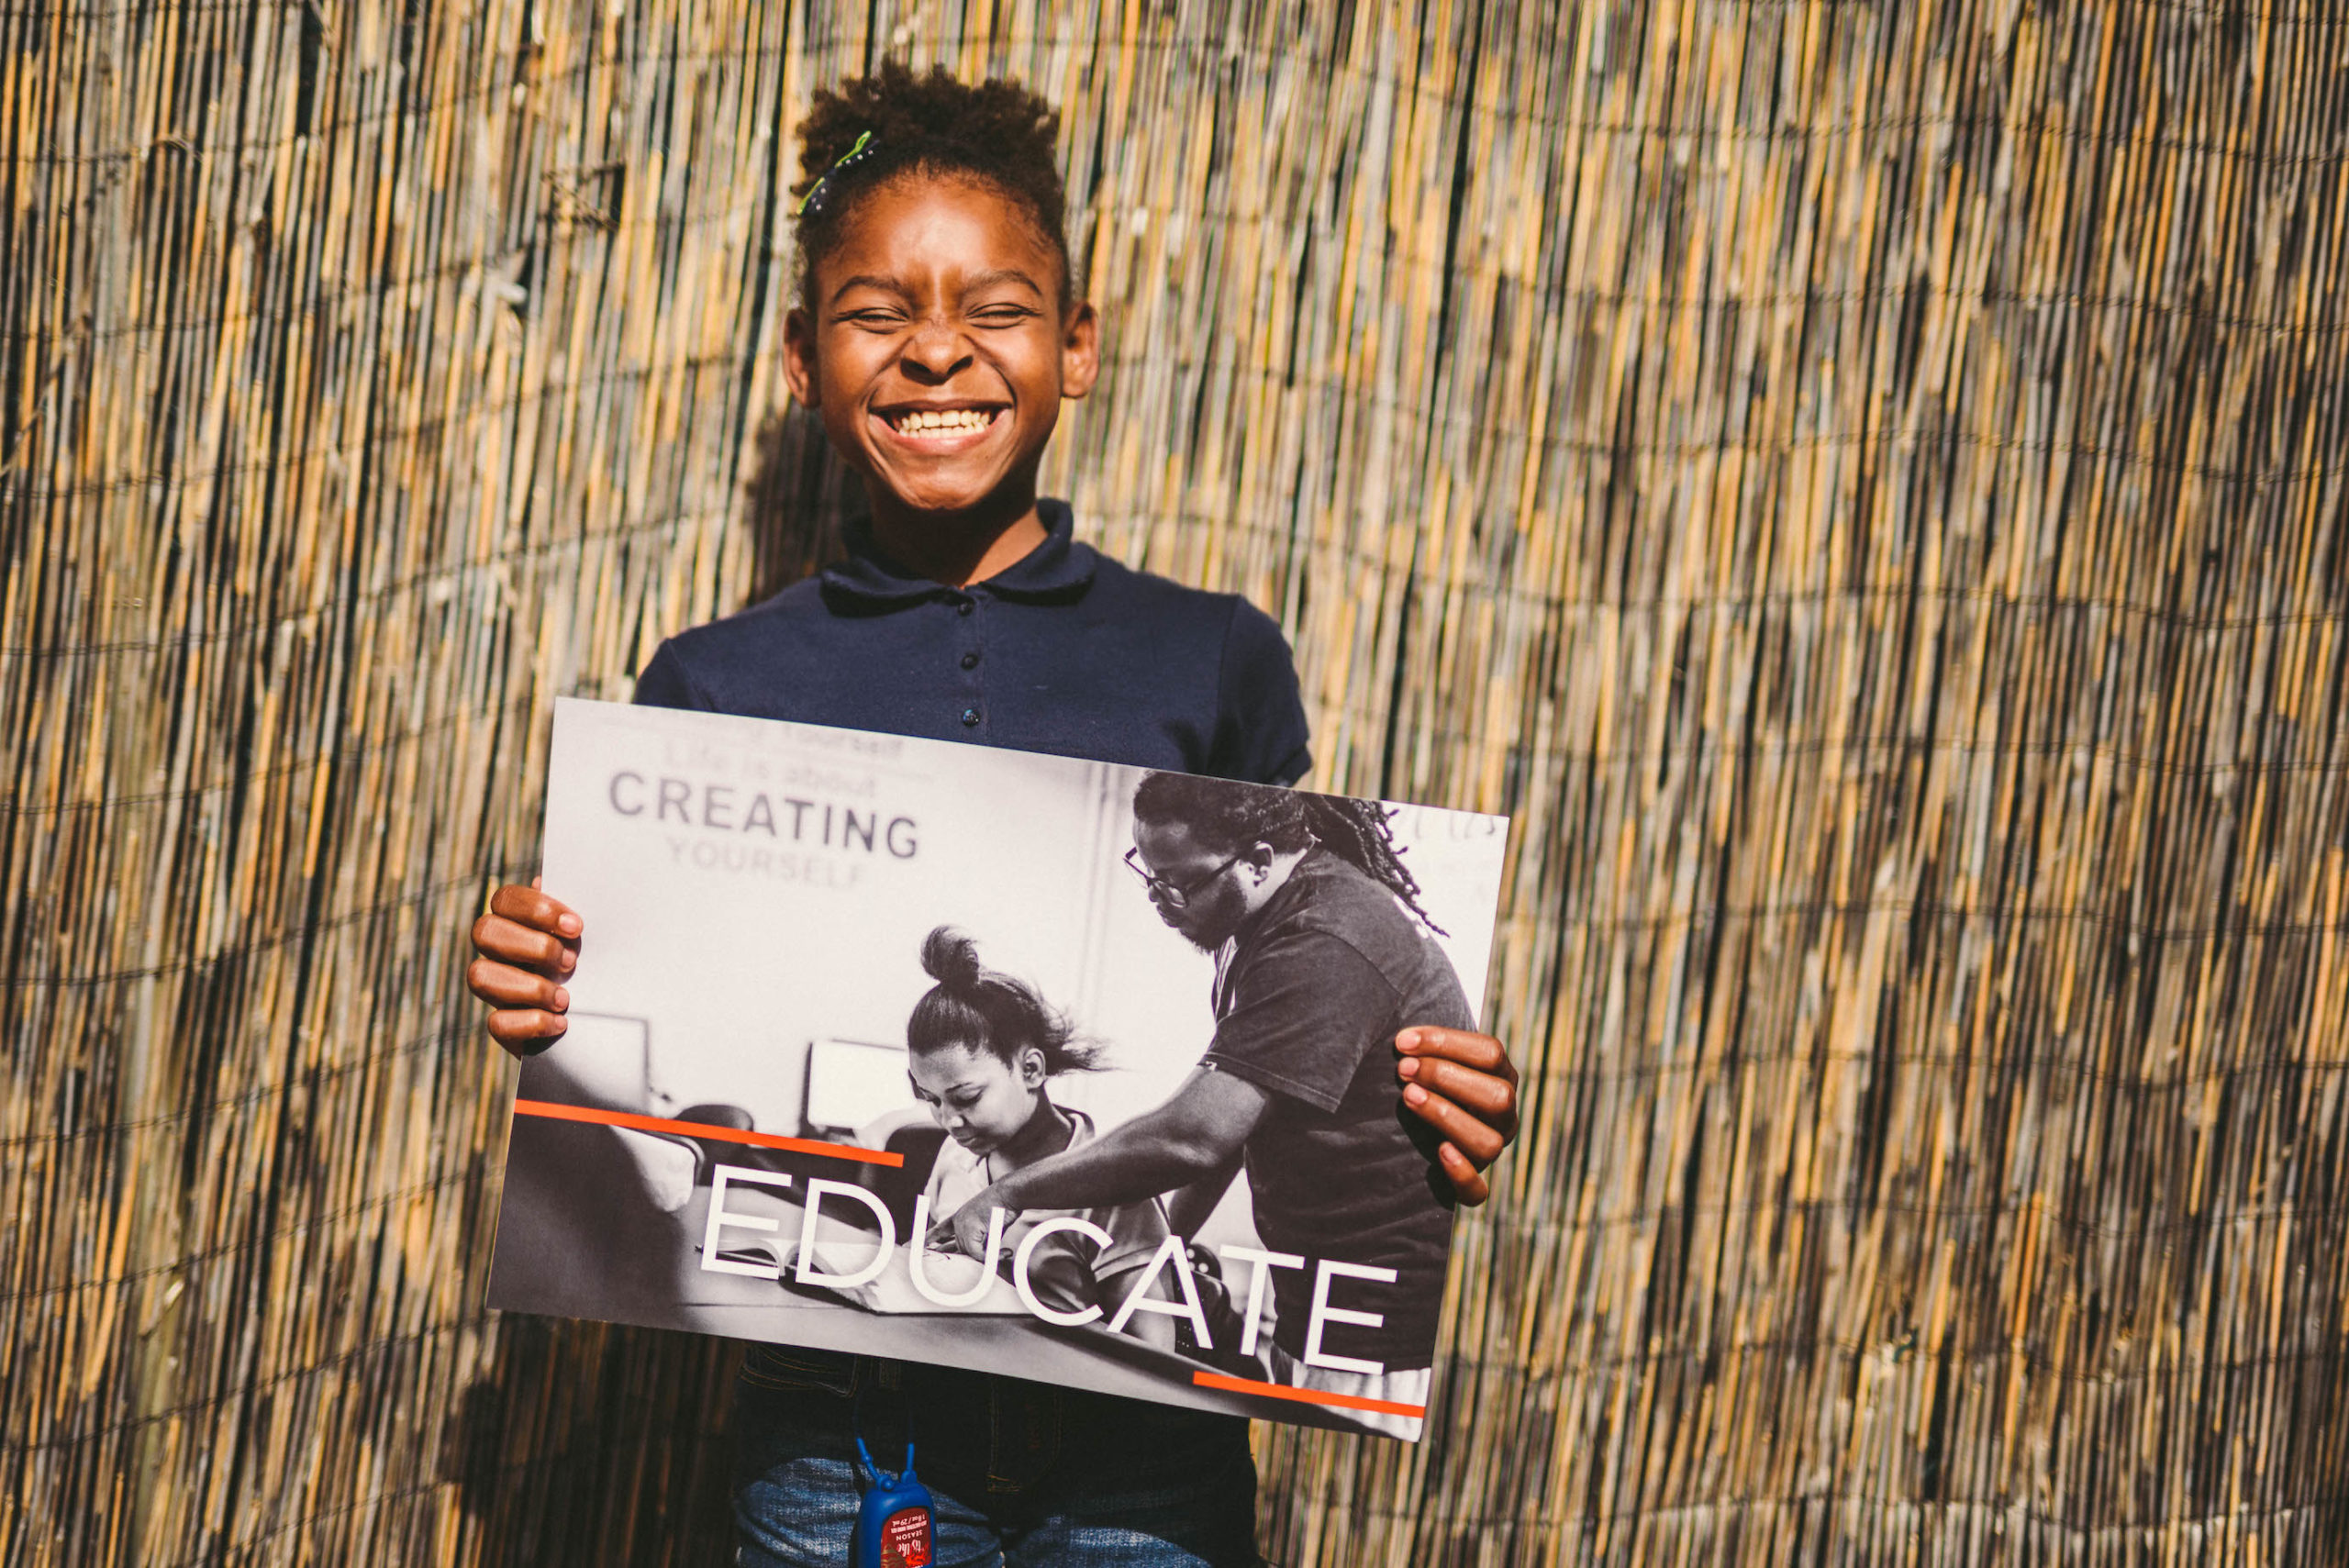 Handy Nonprofit African American holding a black and white poster that shows two people with the word Educate